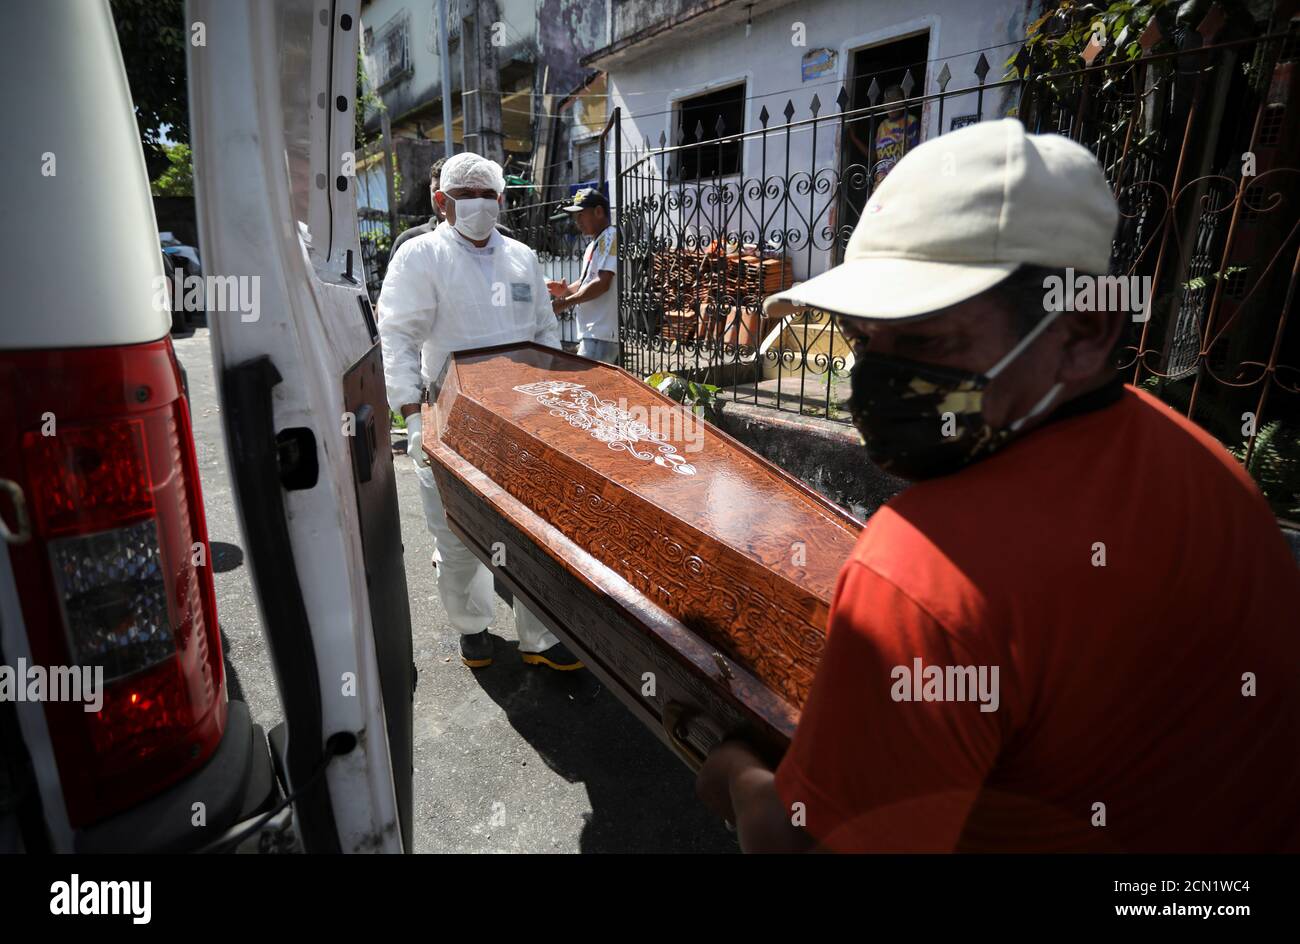 A relative and a worker of the Funeral SOS of the city of Manaus, wearing protective clothing, remove the coffin of Amadeu Garcia da Silva, 80, from his house, amid the coronavirus disease (COVID-19) outbreak, in Manaus, Brazil April 29, 2020. REUTERS/Bruno Kelly Stock Photo